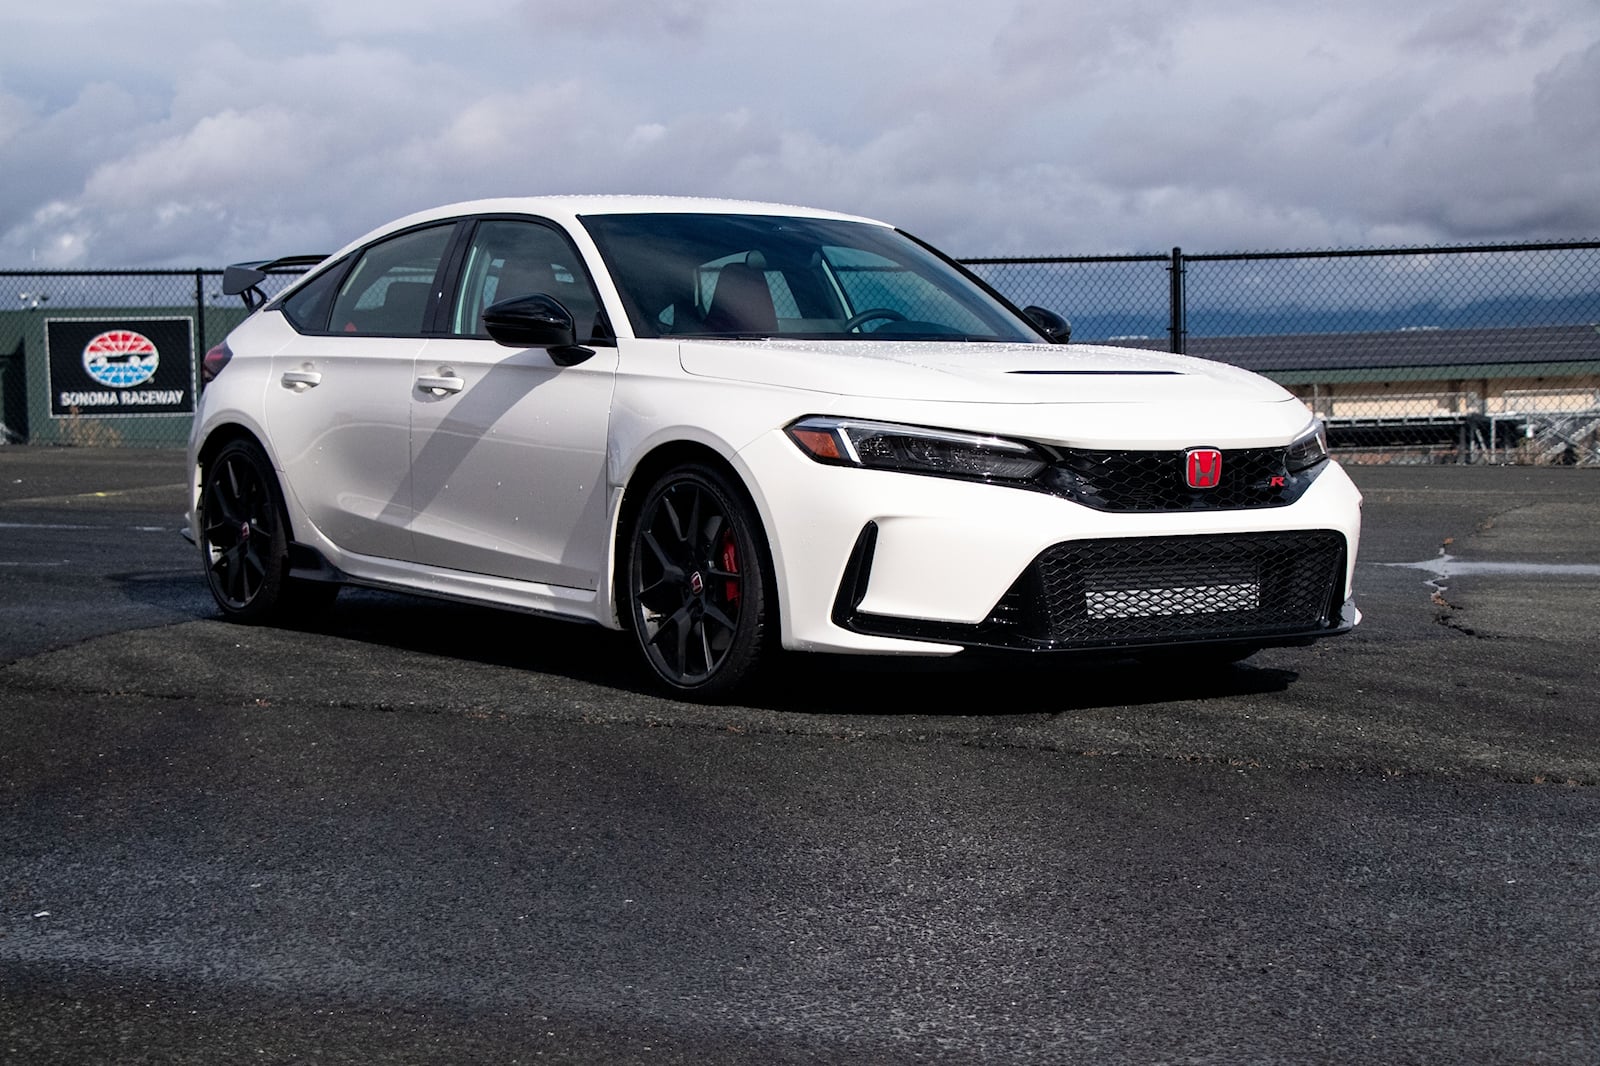 New Civic Type R Launches for 2023 with 315 HP—the Most Powerful Production  Honda Ever in the U.S.